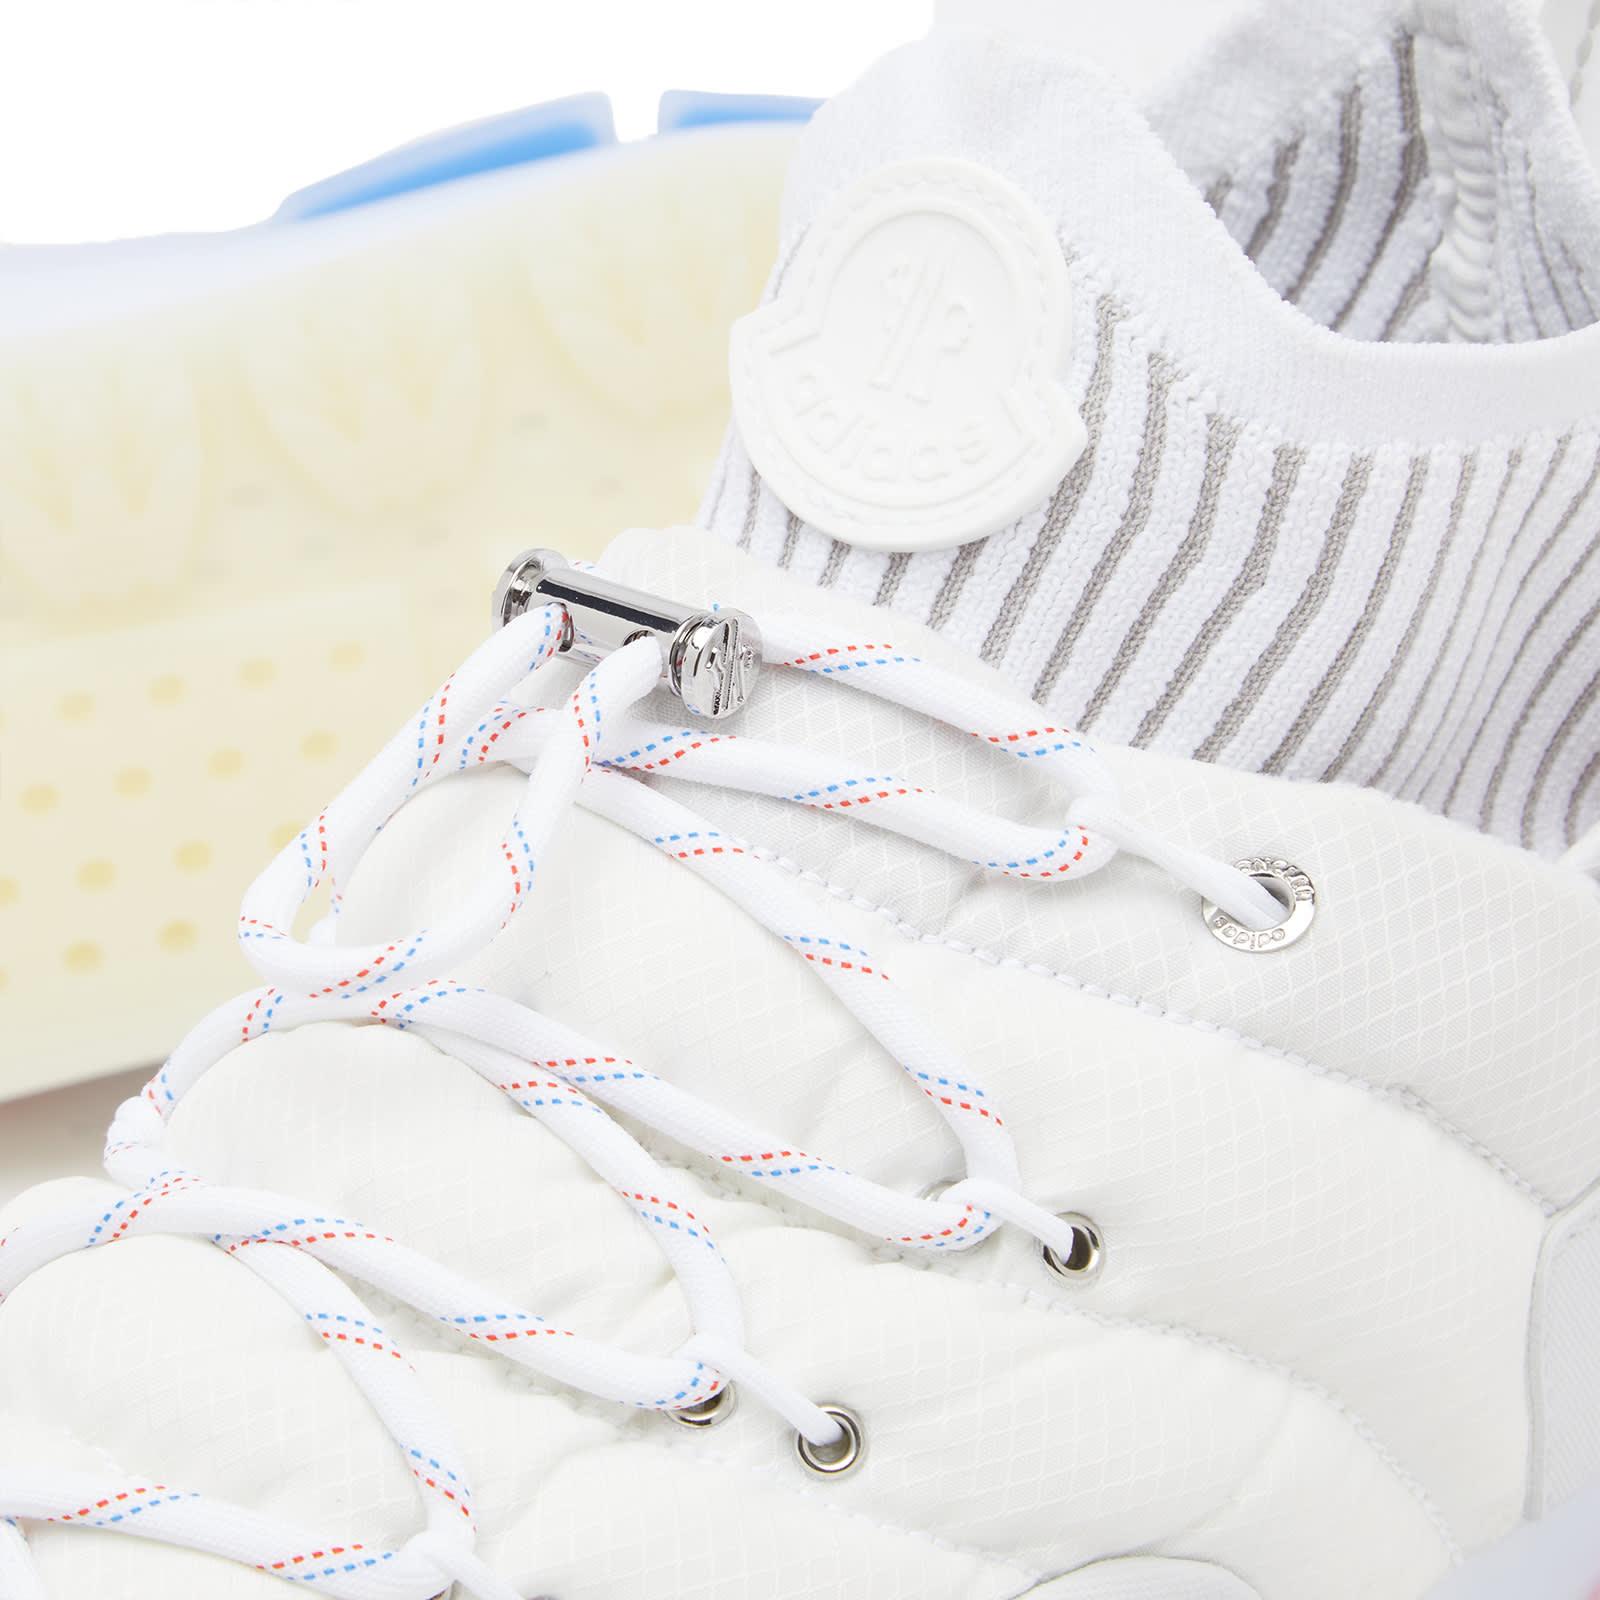 Moncler X Adidas Originals Nmd Runner Sneakers in White | Lyst